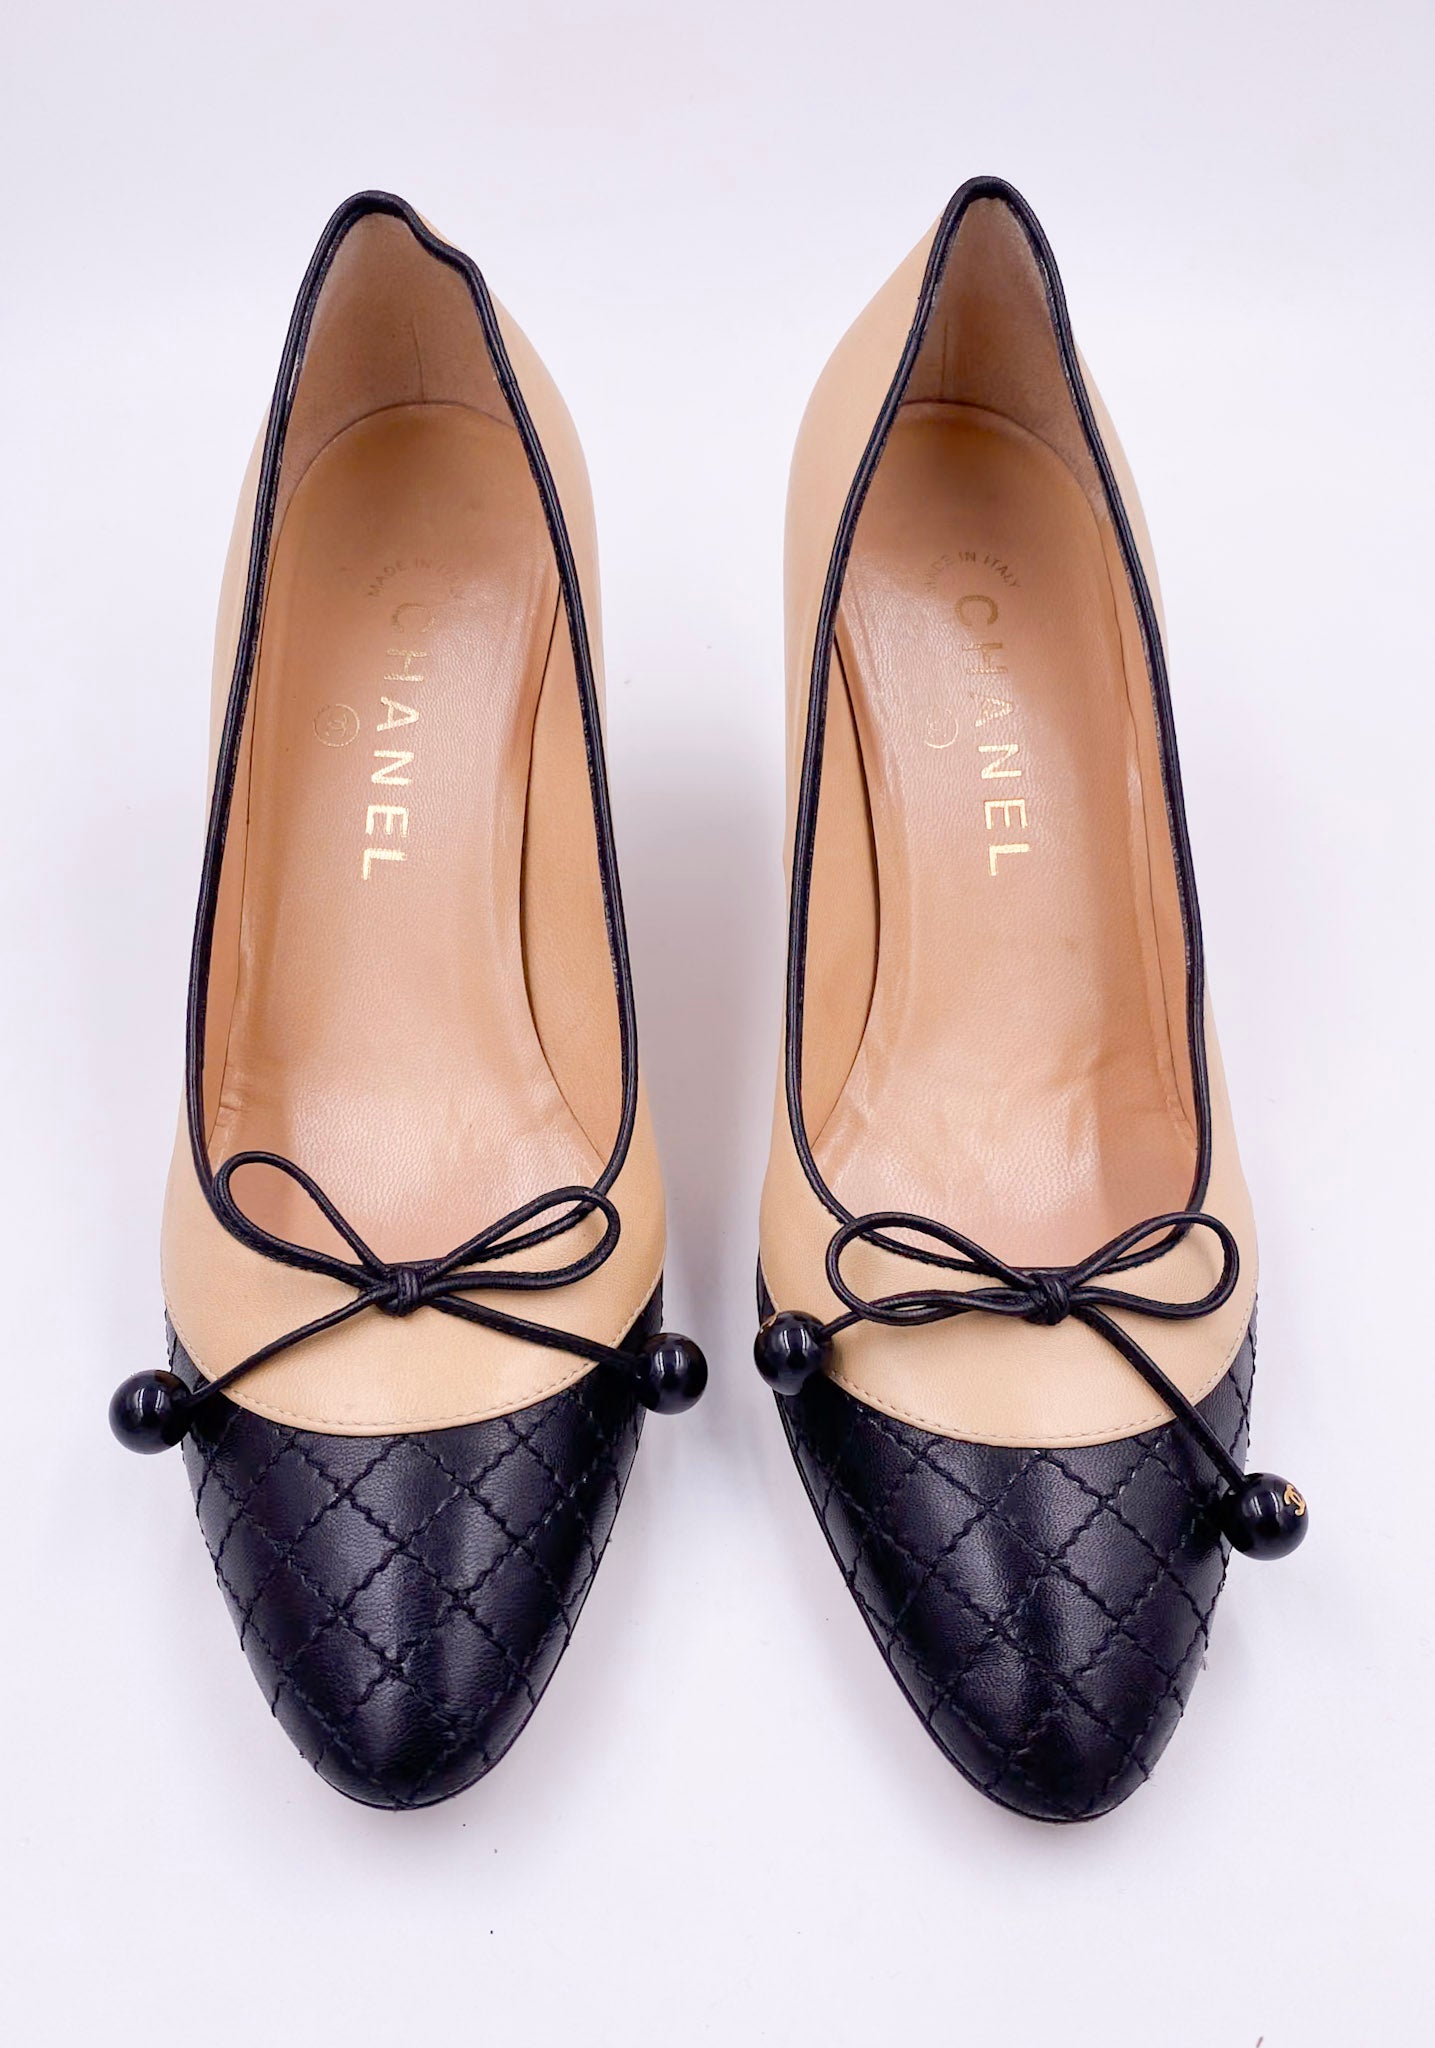 Chanel Beige Pump with Black Quilted Toe